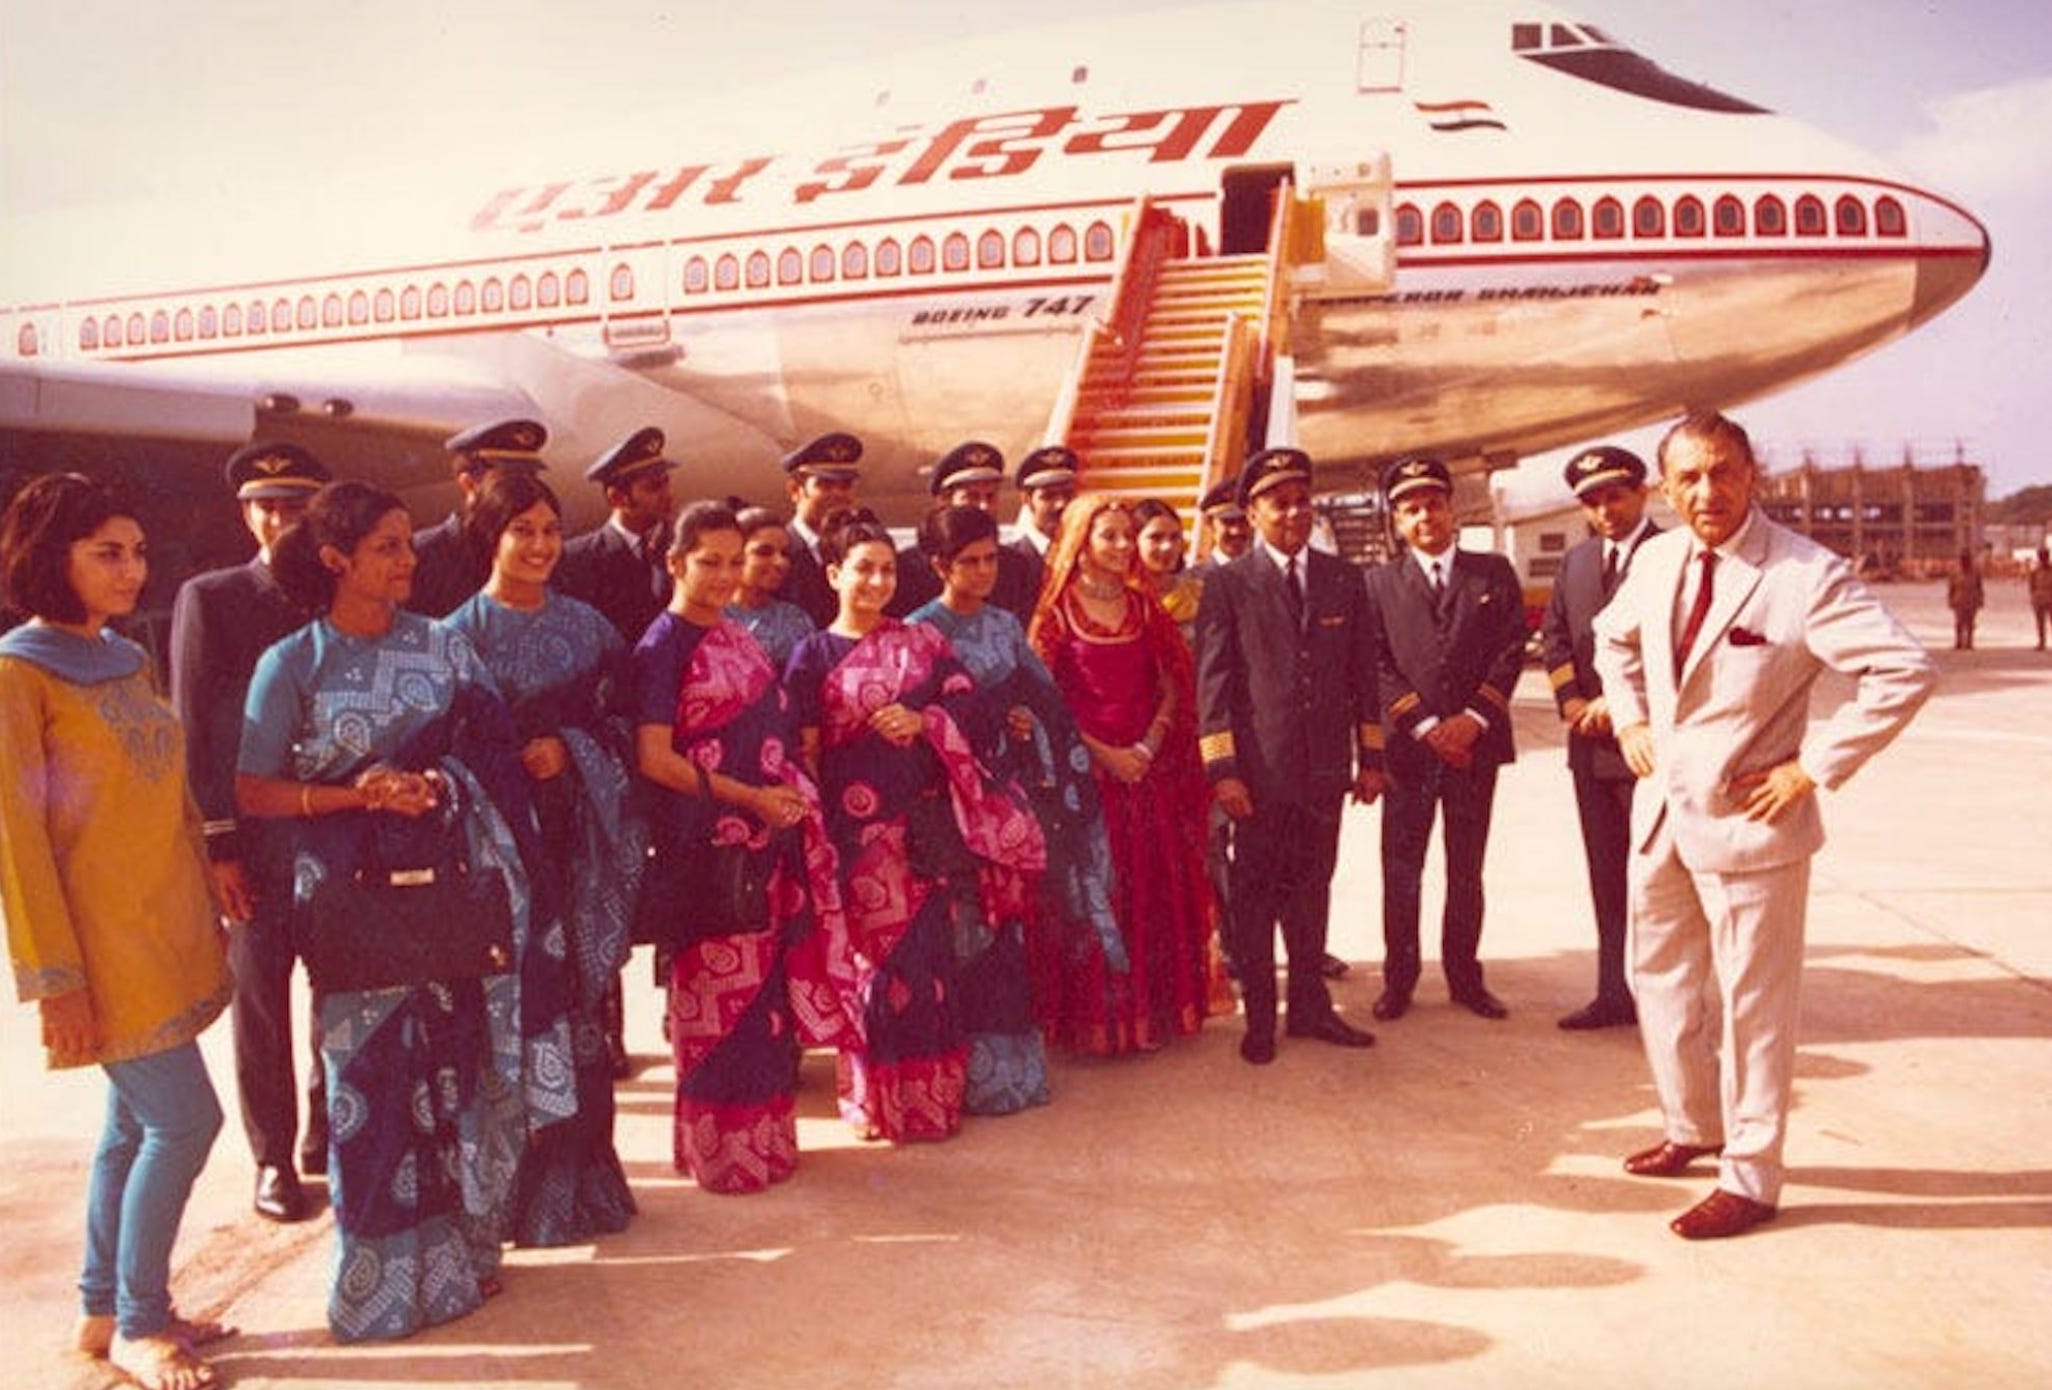 <p>Philanthropist and private pilot JRD Tata launched Air India as the country's first commercial airline, and it became famous for its inflight luxuries.</p><p>The carrier was nationalized after India gained independence from Britain in 1947.</p>